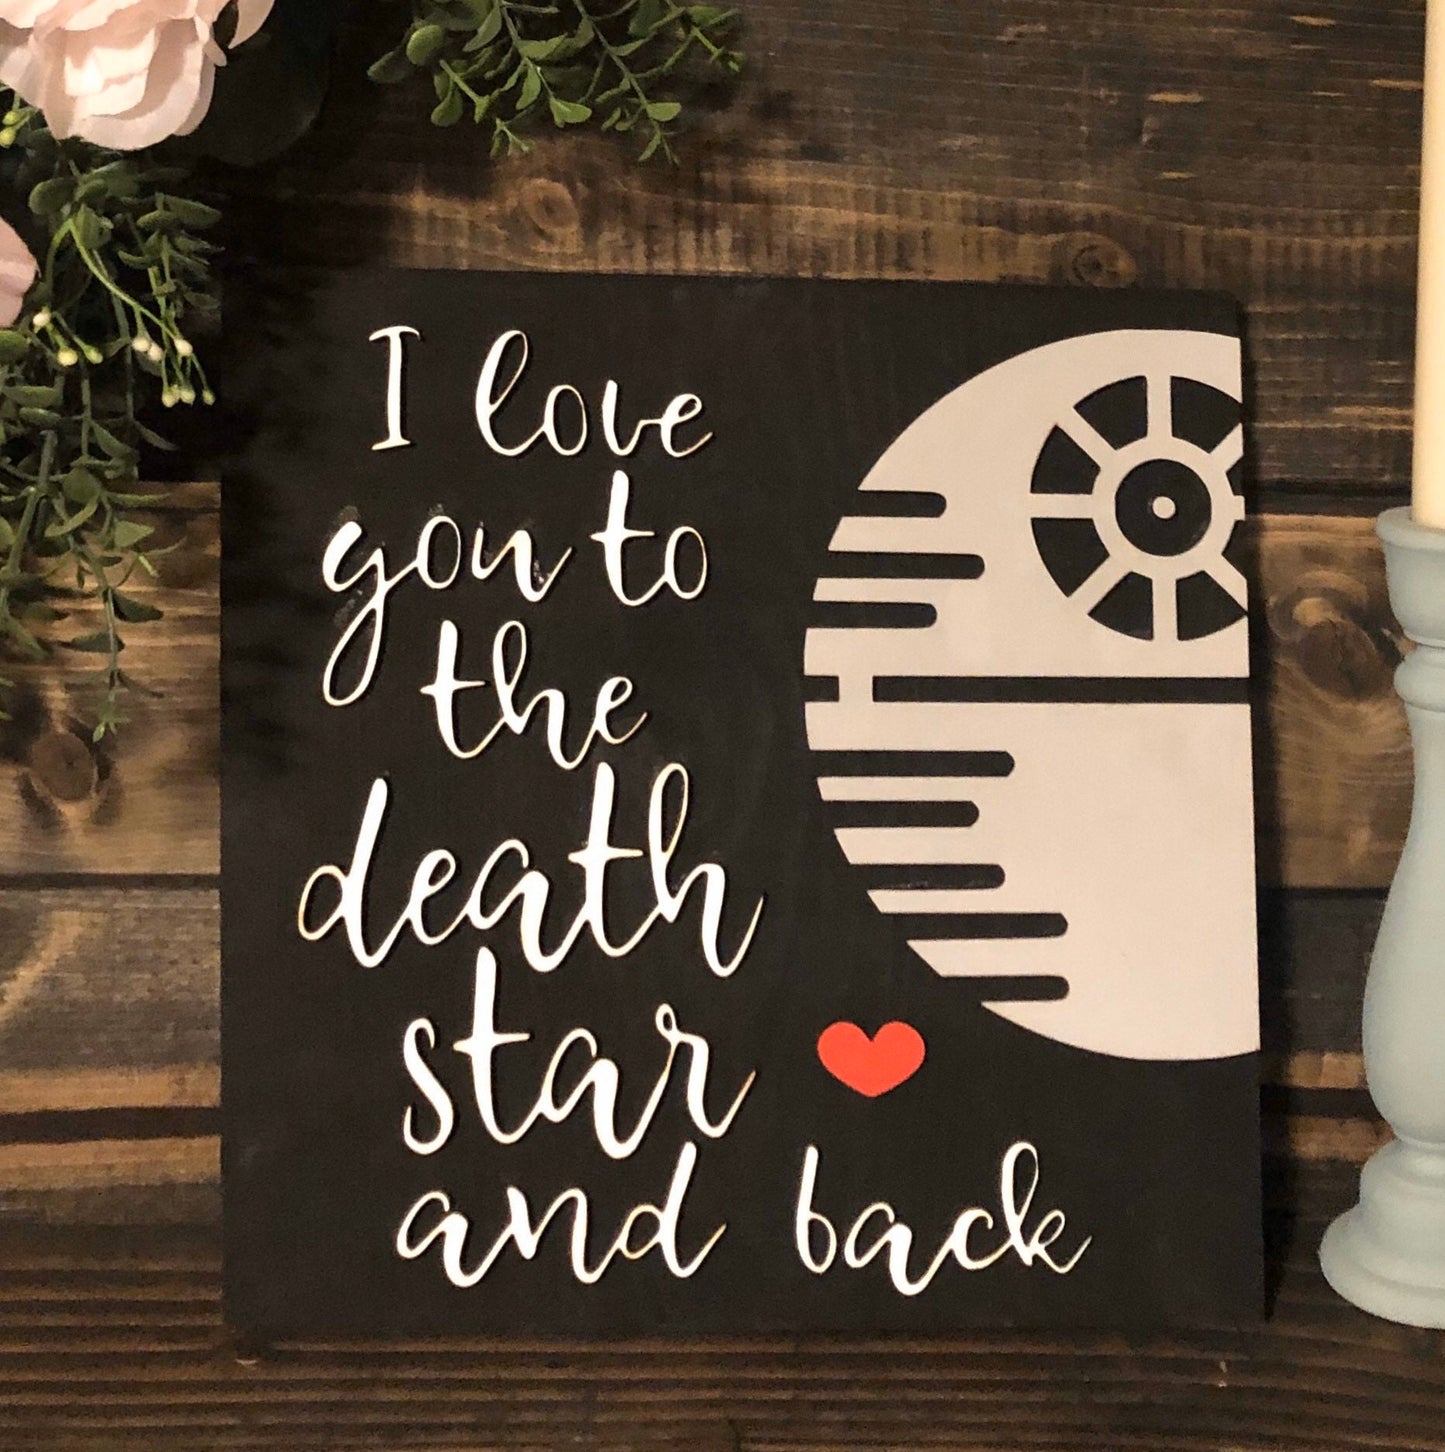 I love you to the Death Star and back, Death Star sign, Star Wars sign, Star Wars valentines sign, I love you sign, I love you, Death Star